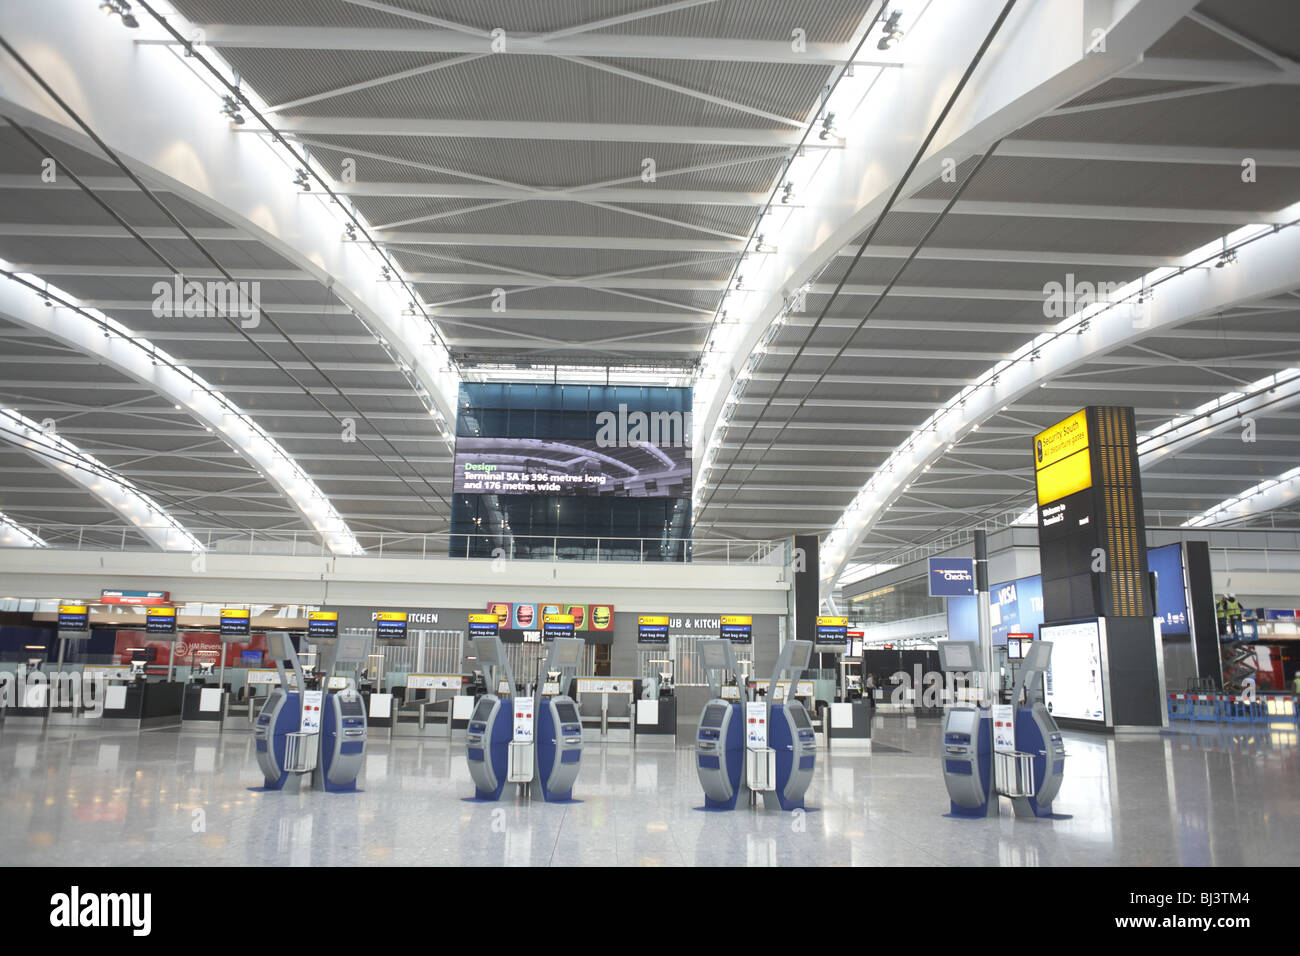 Heathrow Airport's terminal interior before official opening. Stock Photo